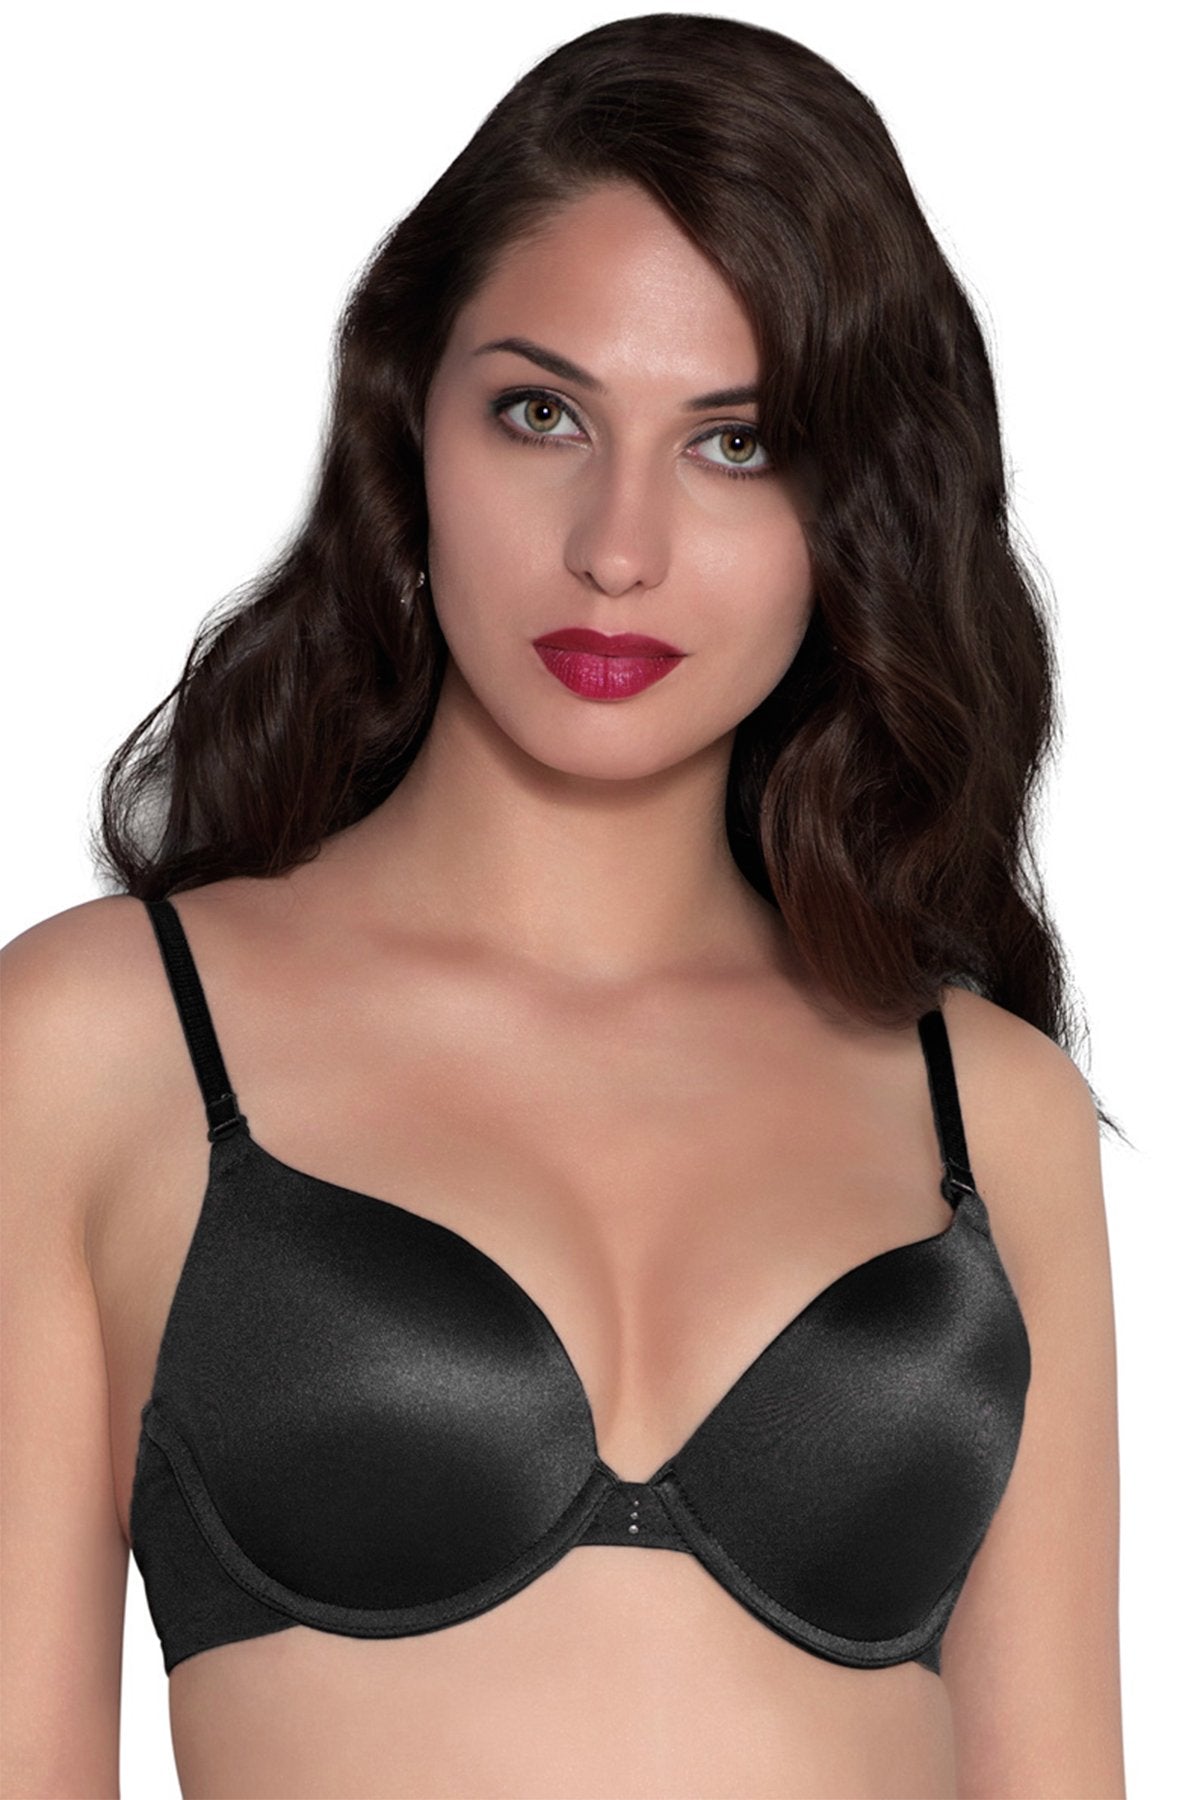 Buy Perfect Lift Padded Wired Push-up Bra, Black Color Bra